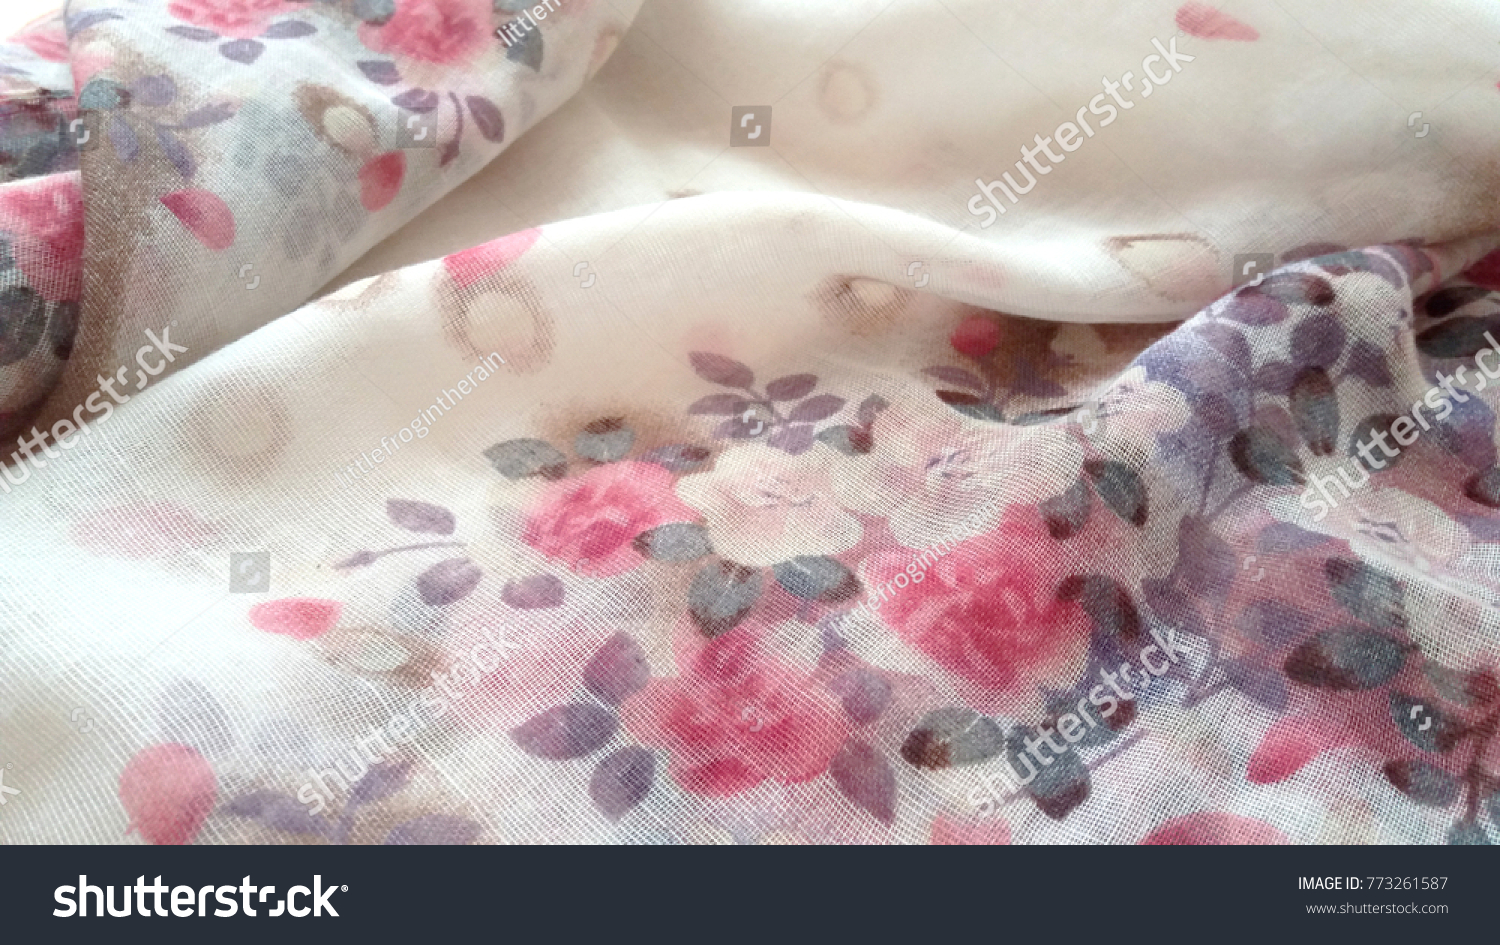 Floral fabric background, floral pattern soft color #773261587